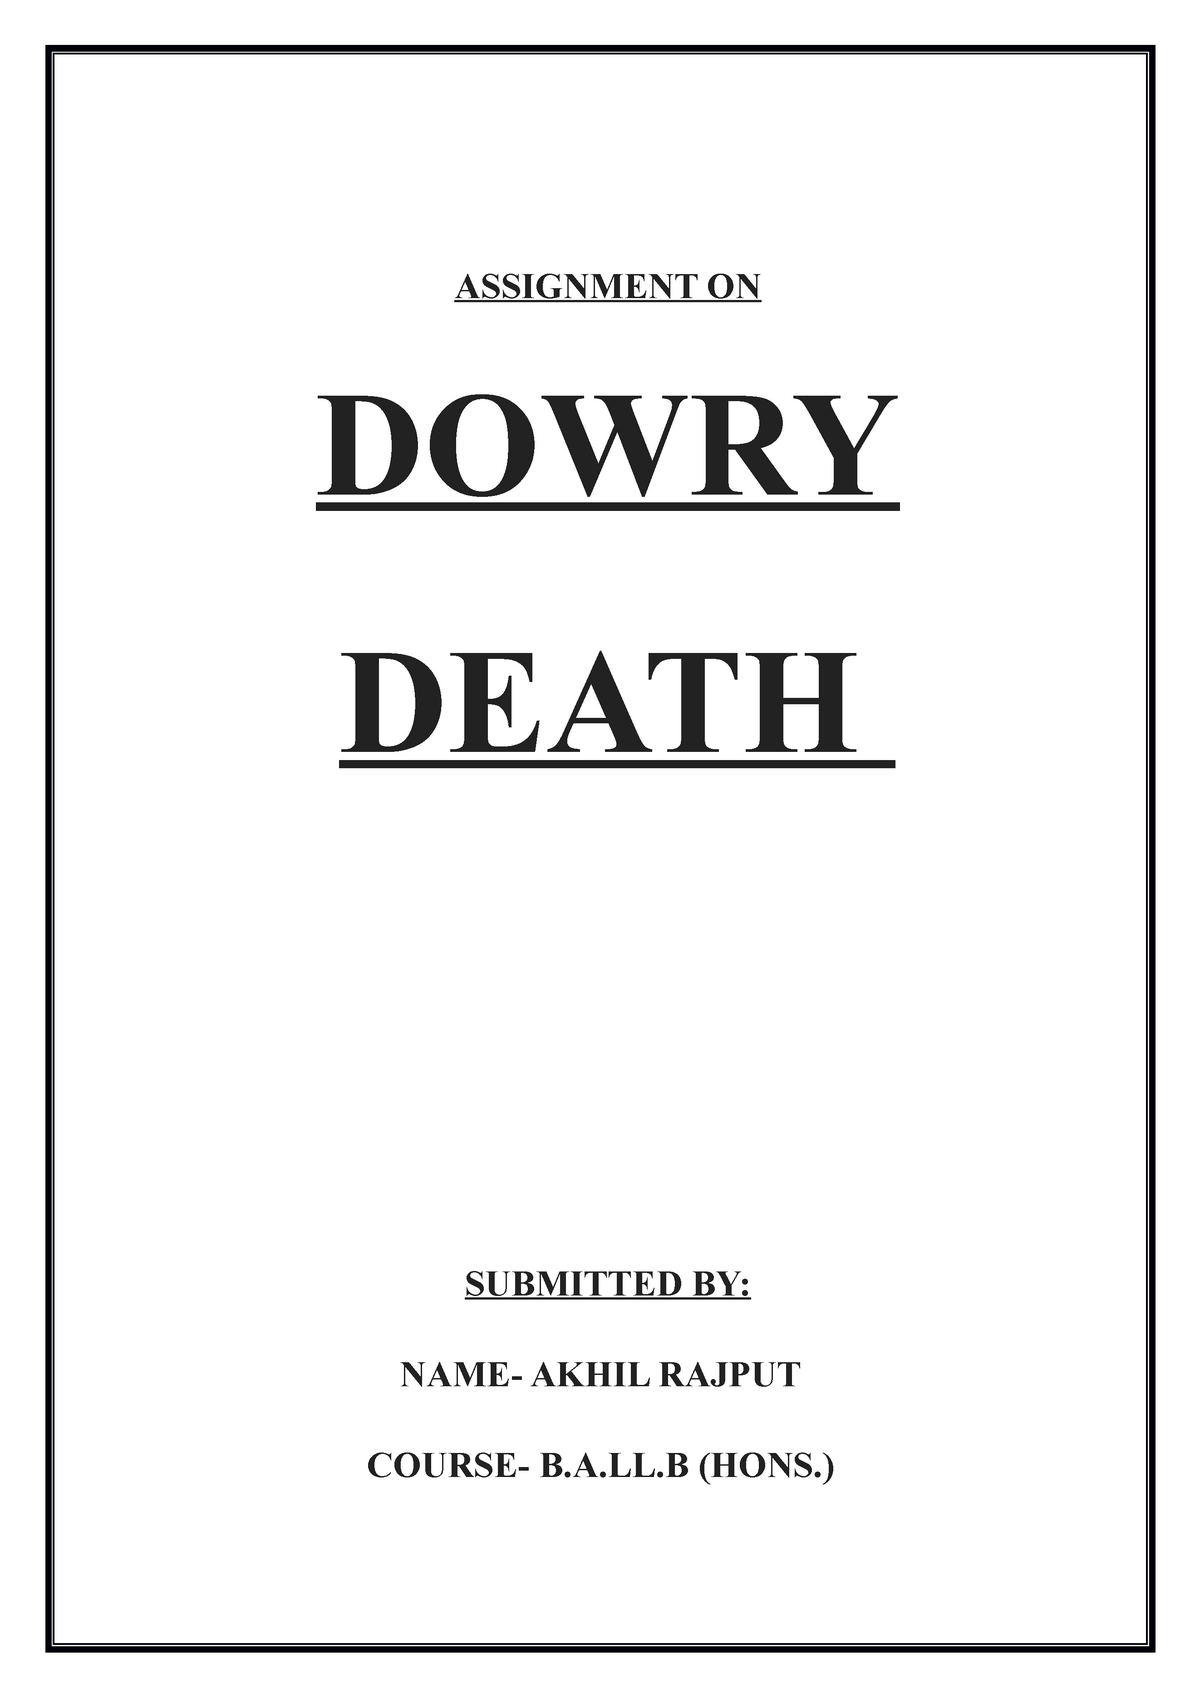 definition of dowry death